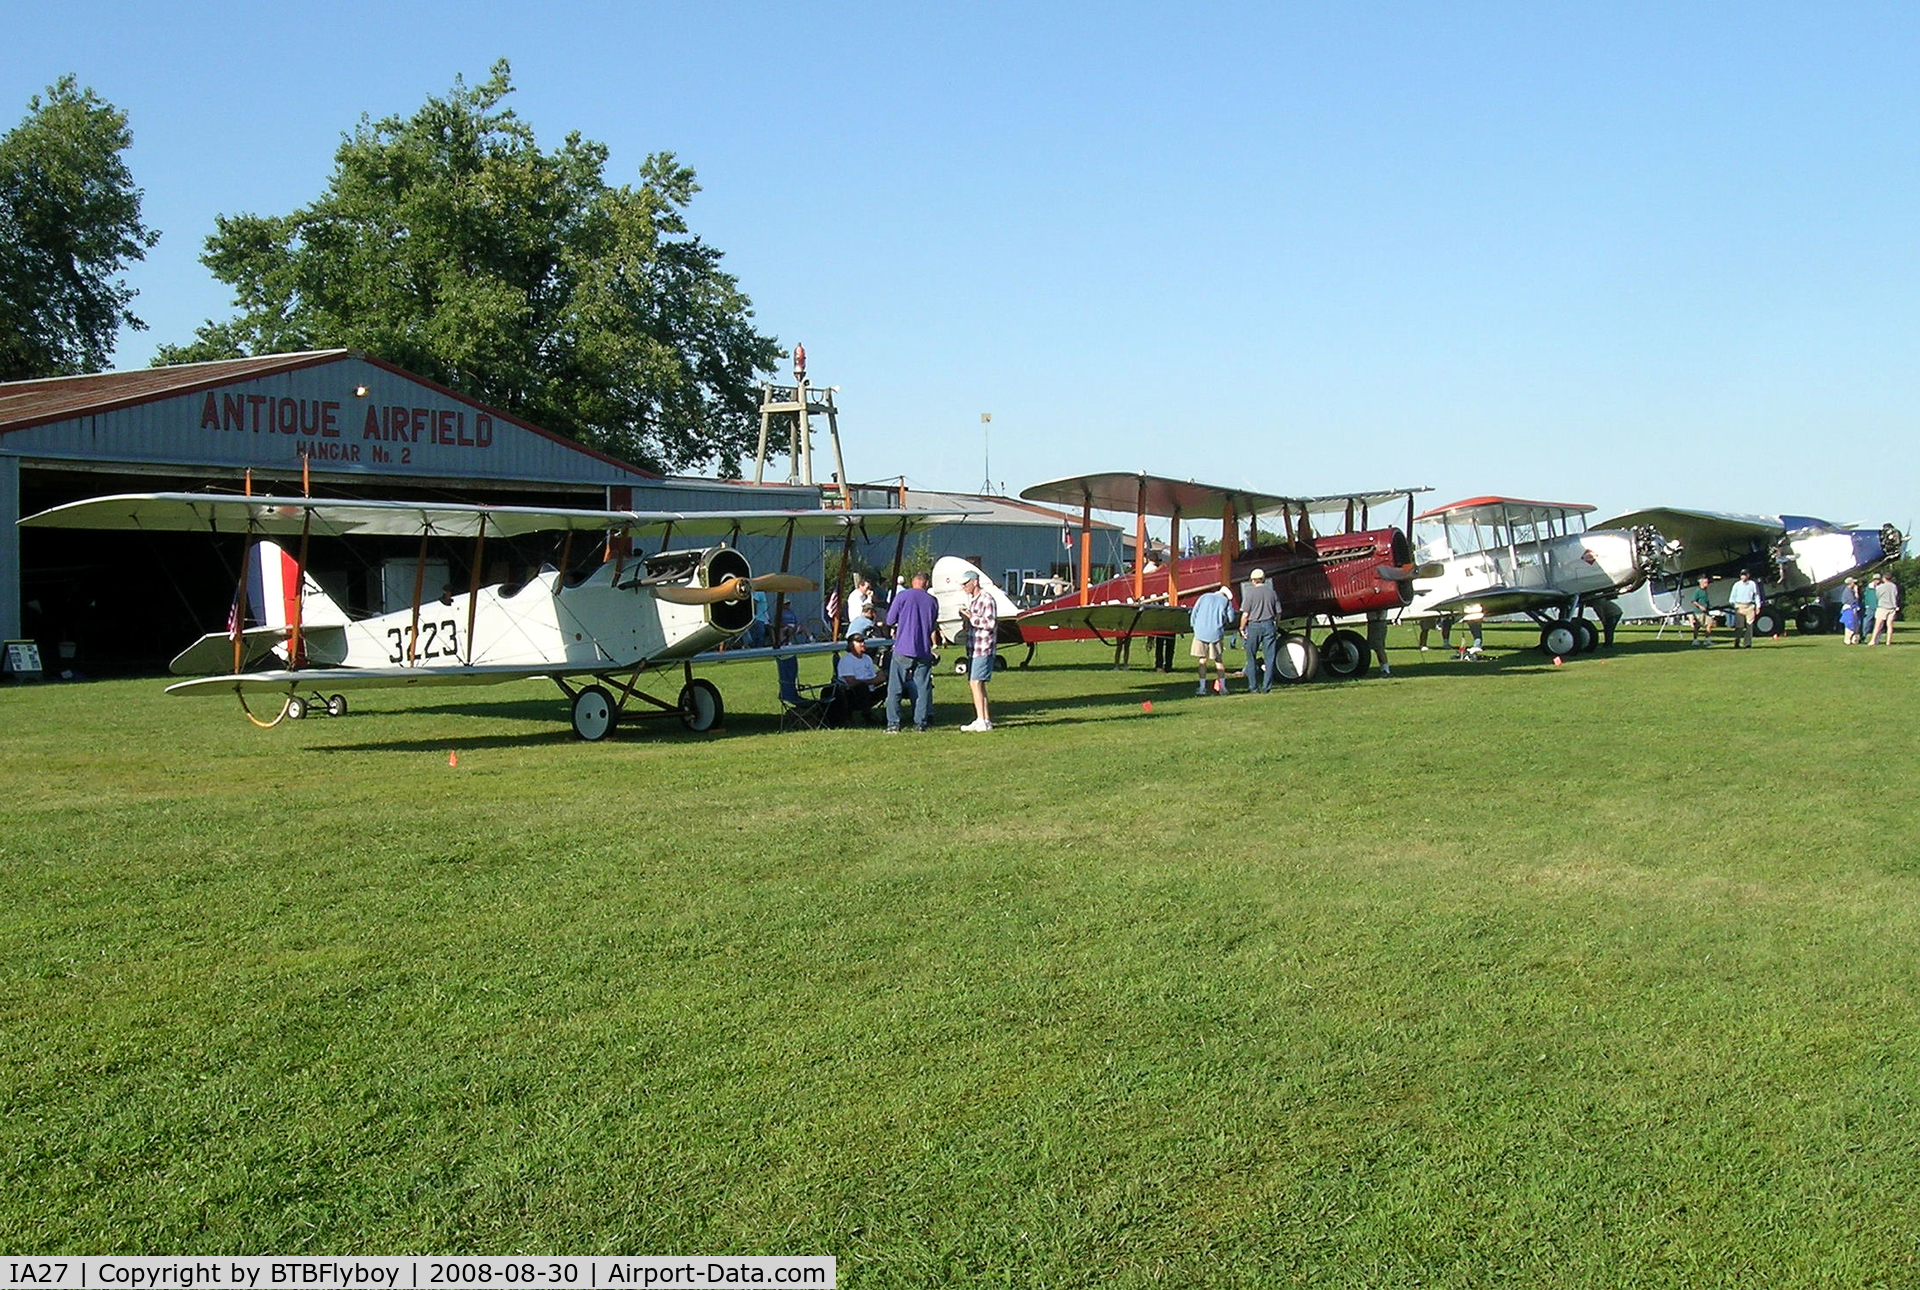 Antique Airfield Airport (IA27) - Antique Airplane lineup of the decade at Antique Airfield near Blakesburg, IA. Curtiss JN-4h 